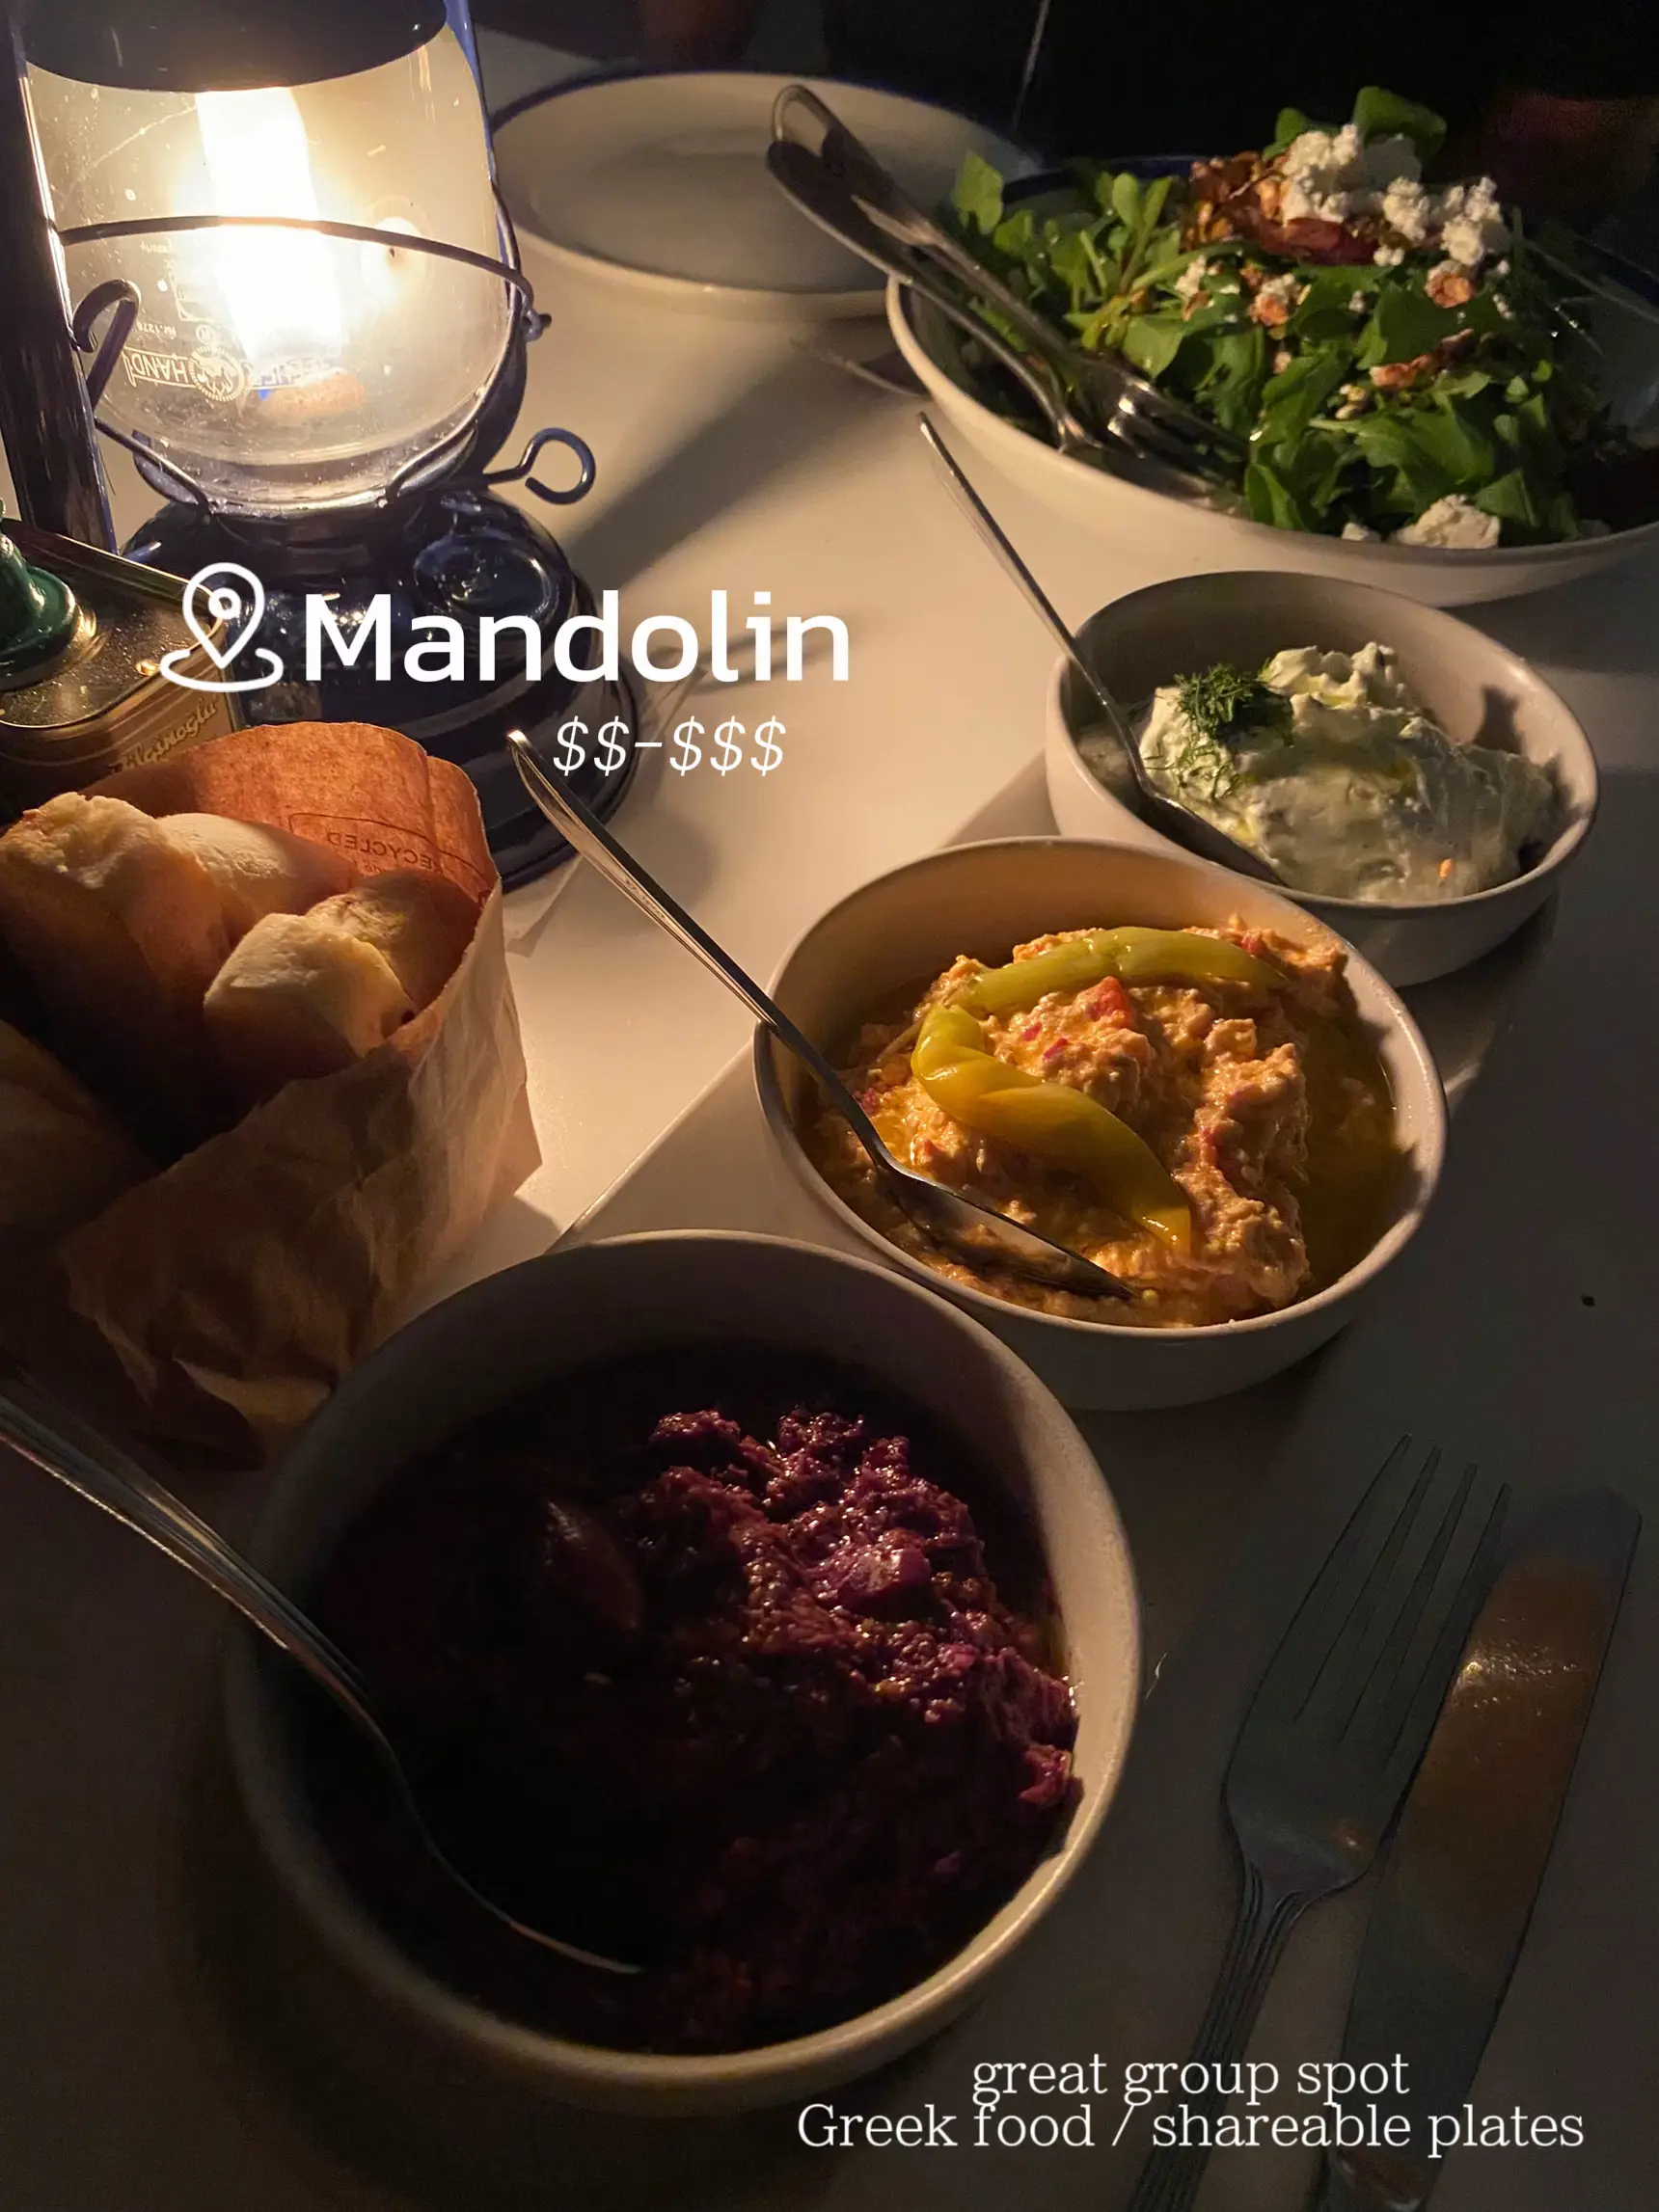 Mandolin Miami Design District - delicious, authentic Greek with a lovely  ambiance.